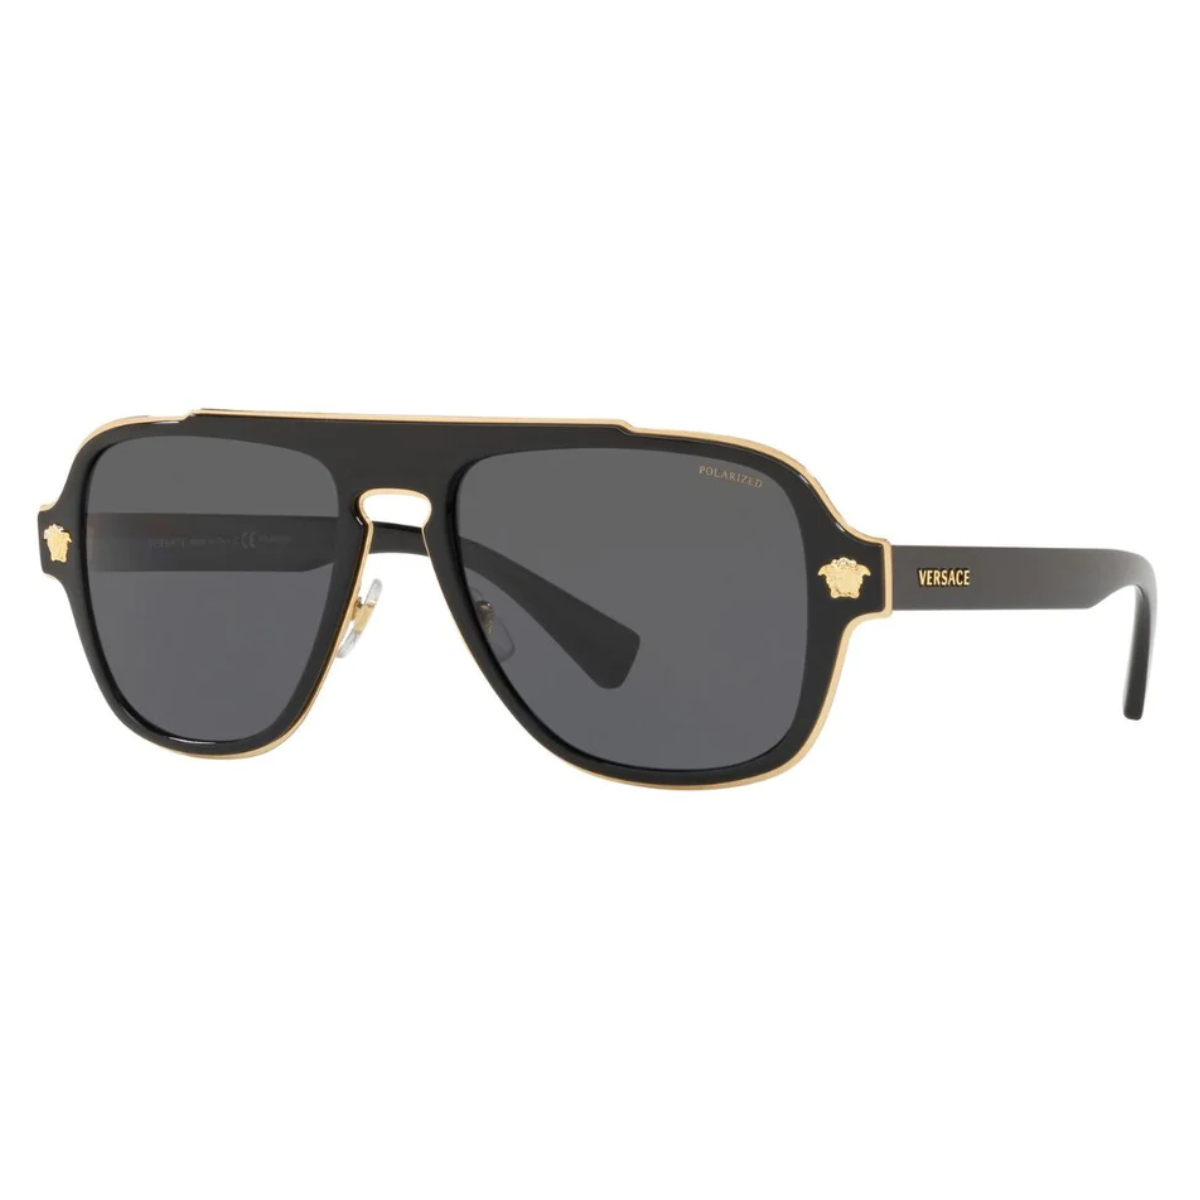 "Get the latest Versace 2199 1001/87 Sunglasses for Men and Women at Optorium! Upgrade your style today!"